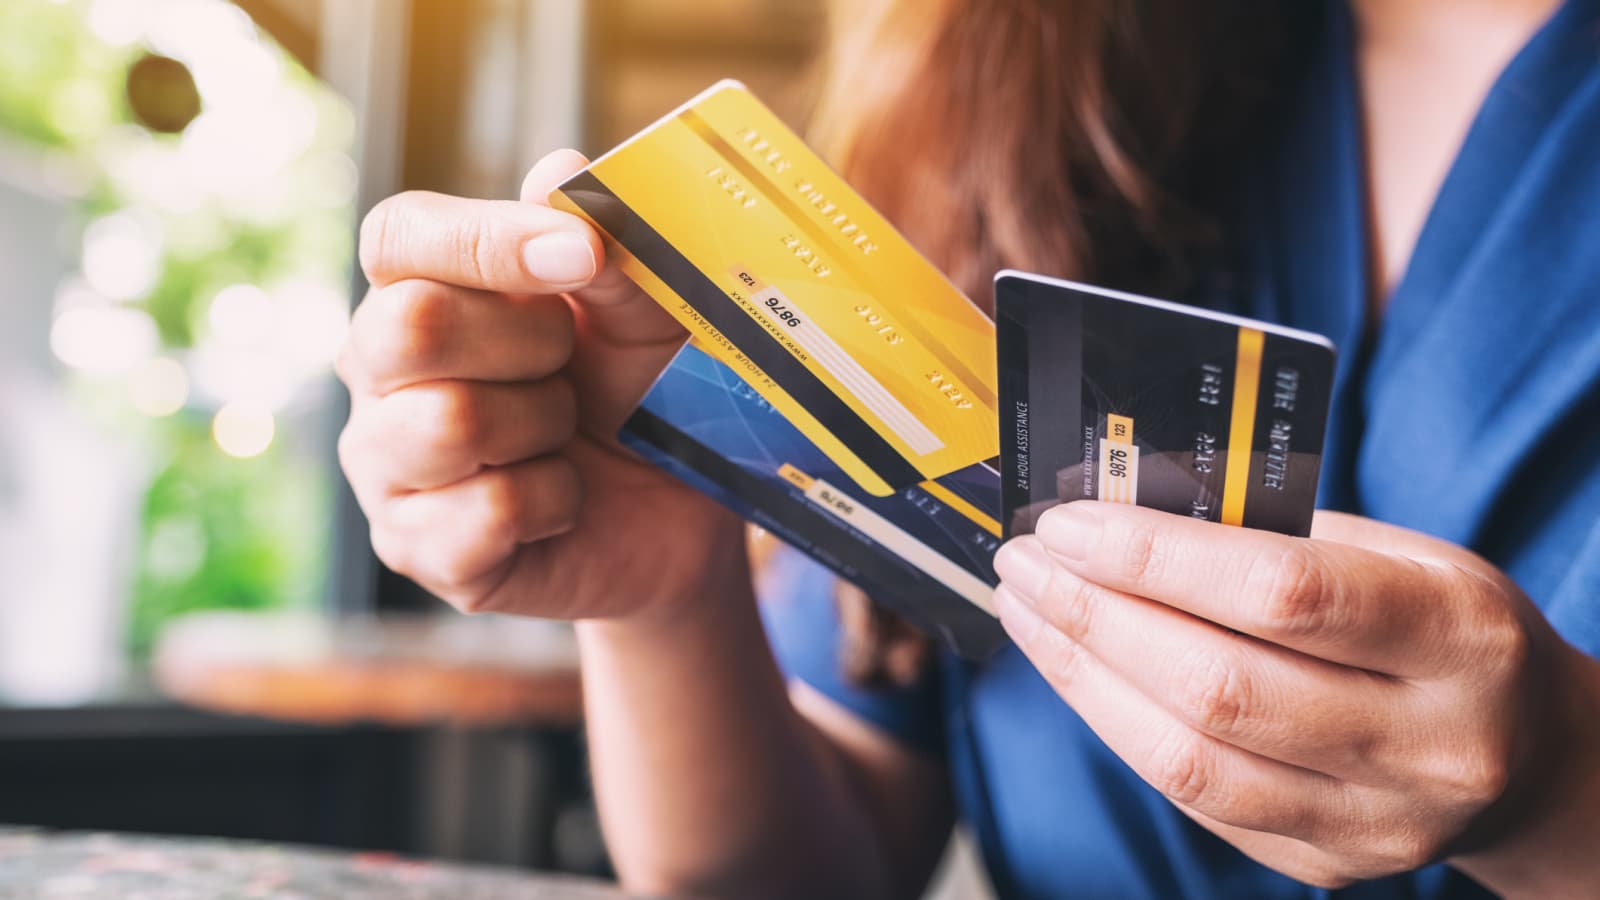 Prepaid Card vs. Debit Card: What's the Difference?